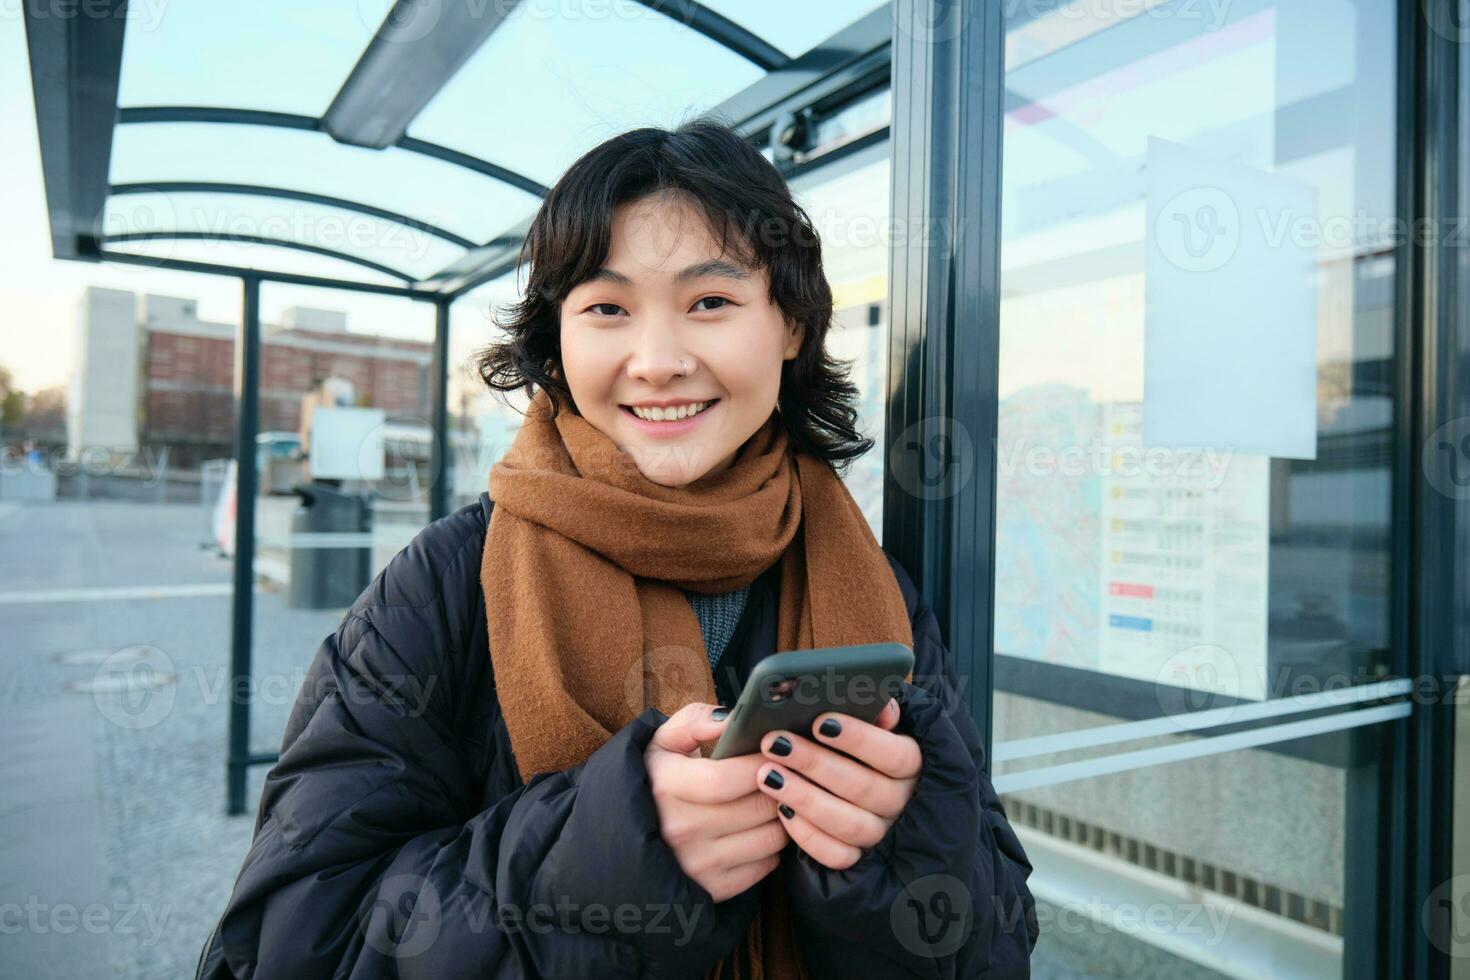 Cute young girl, student waiting on a bus stop, looking for her public transport on app tracker, holding smartphone, standing on street near road photo